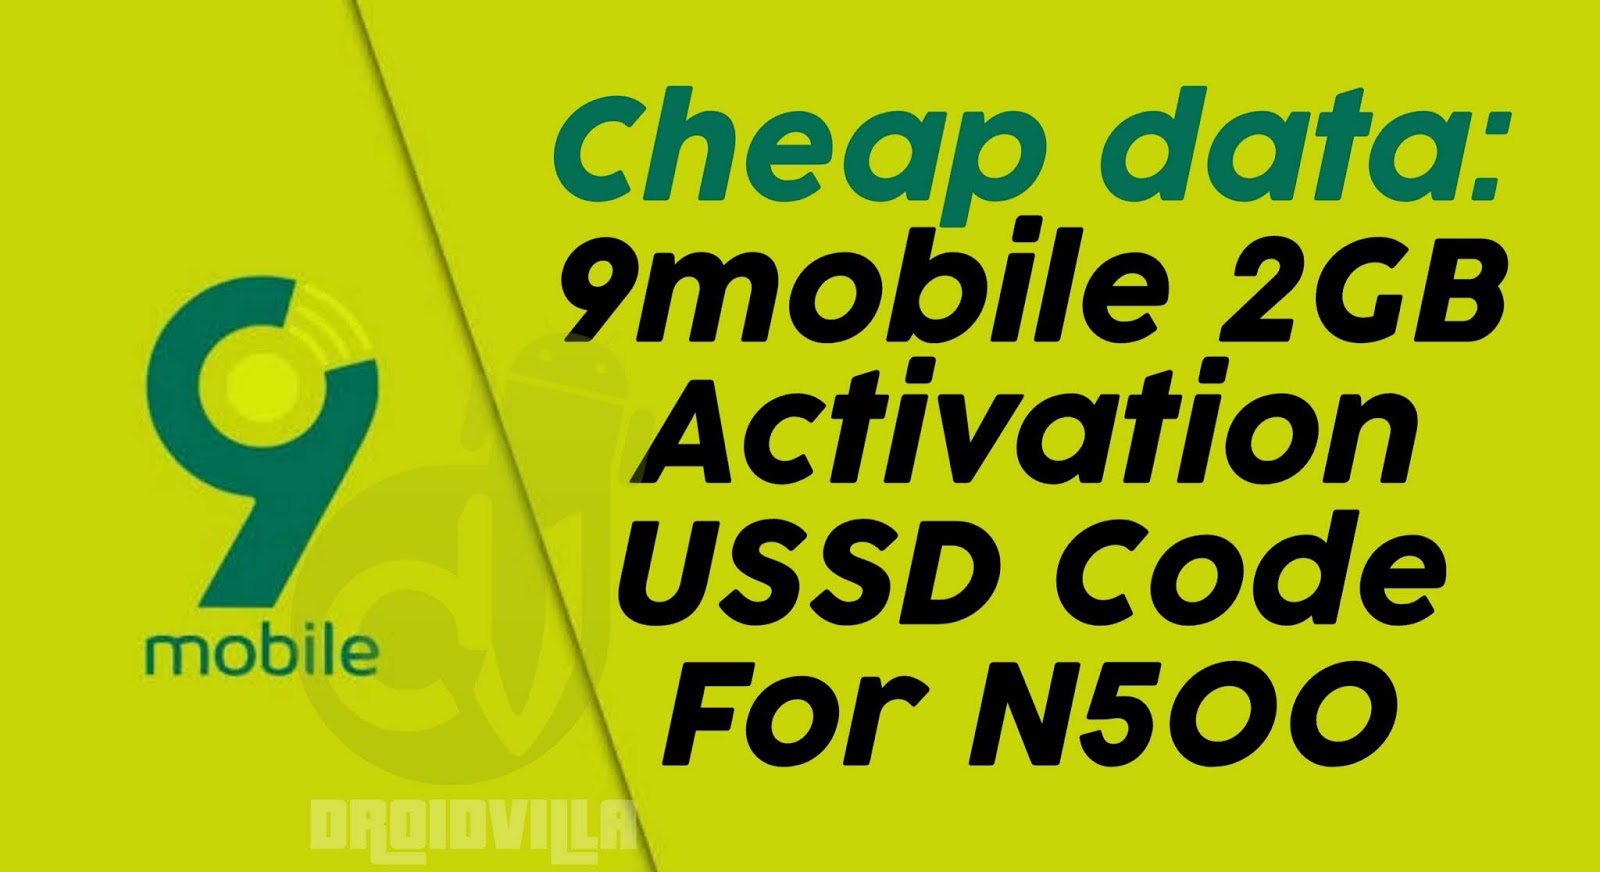 Cheap Data: 9mobile 2GB for N500 USSD Activation Code